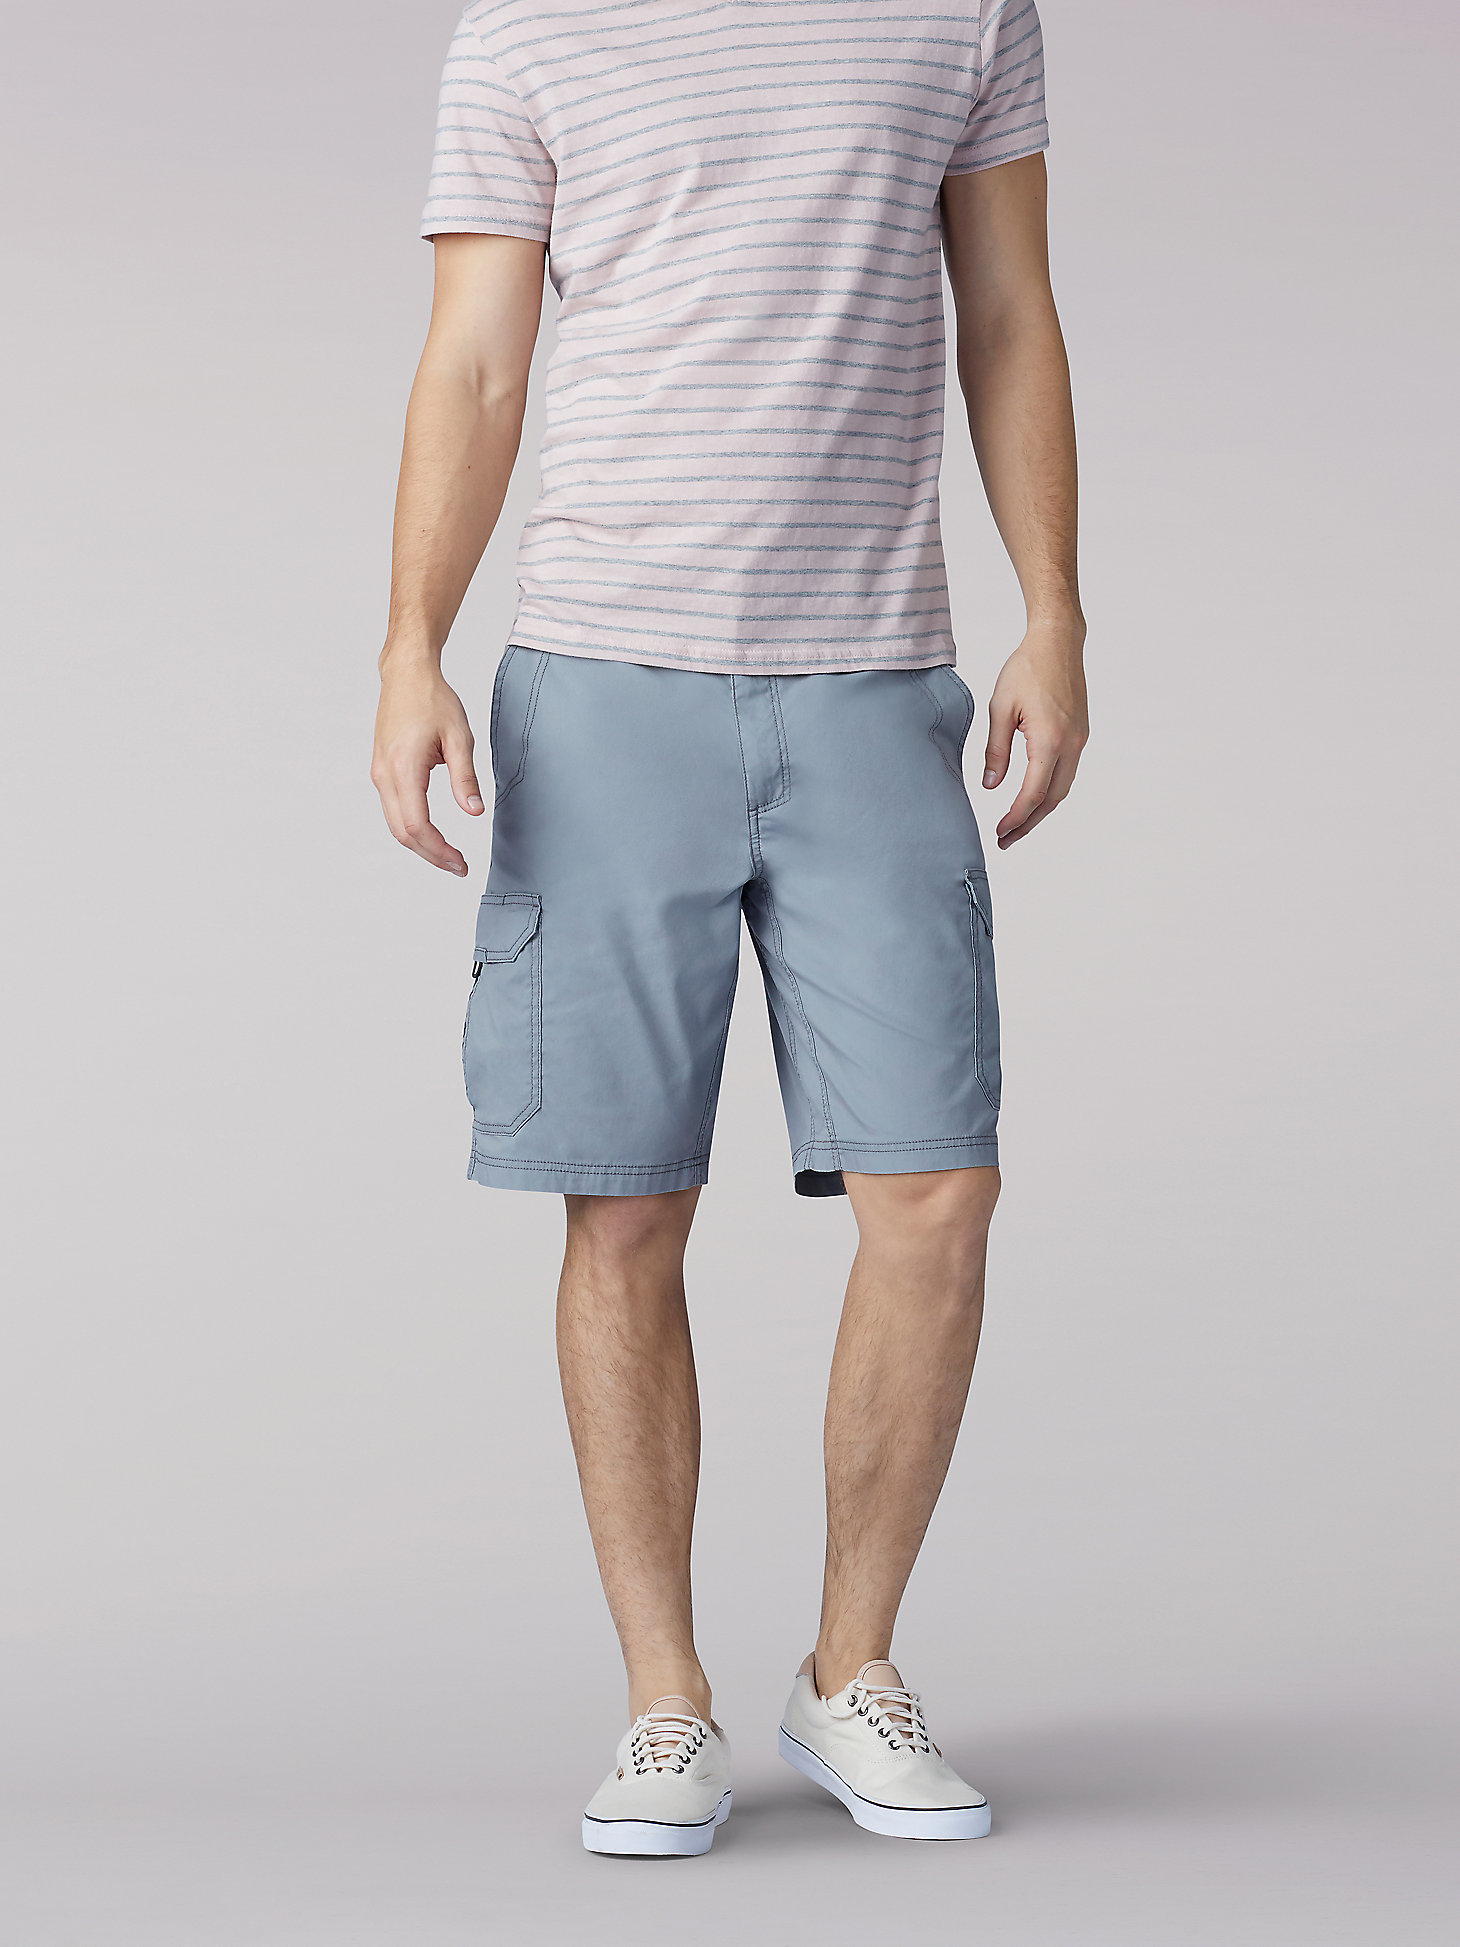 Men’s Extreme Motion Crossroads Shorts in Storm Grey main view